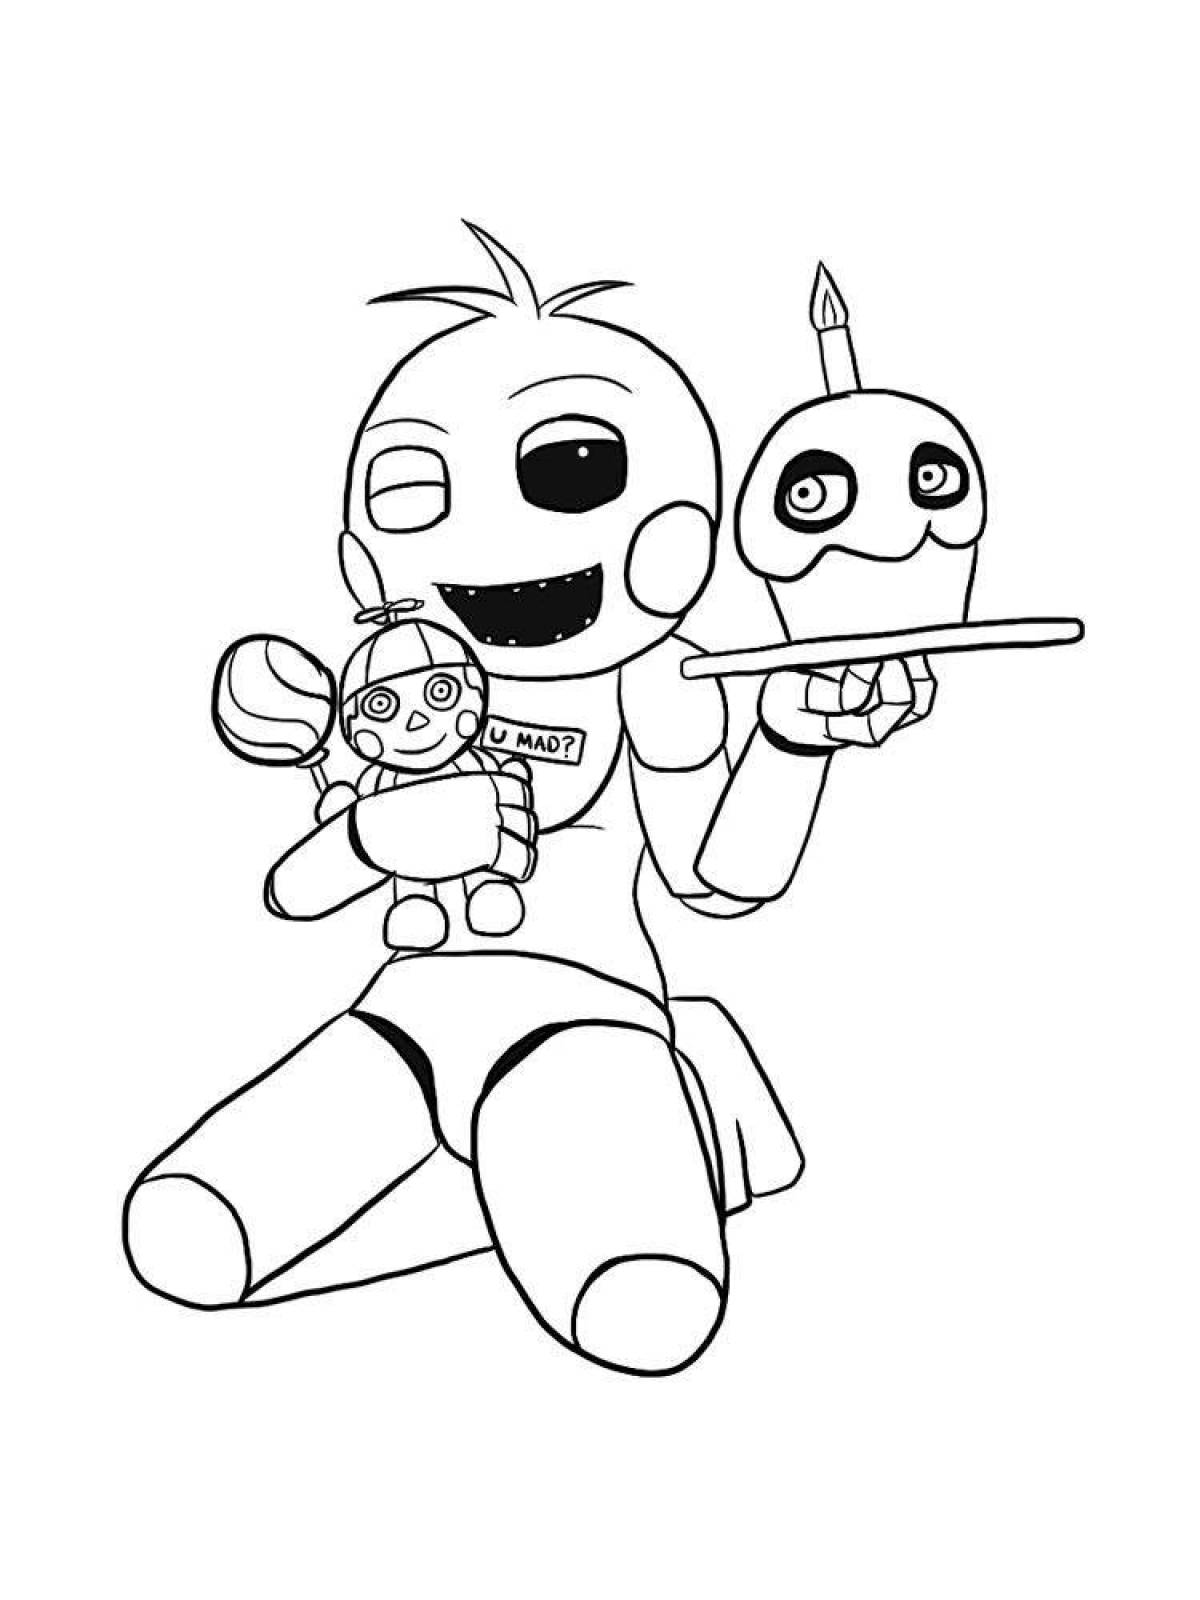 Chica's funny animatronic coloring book